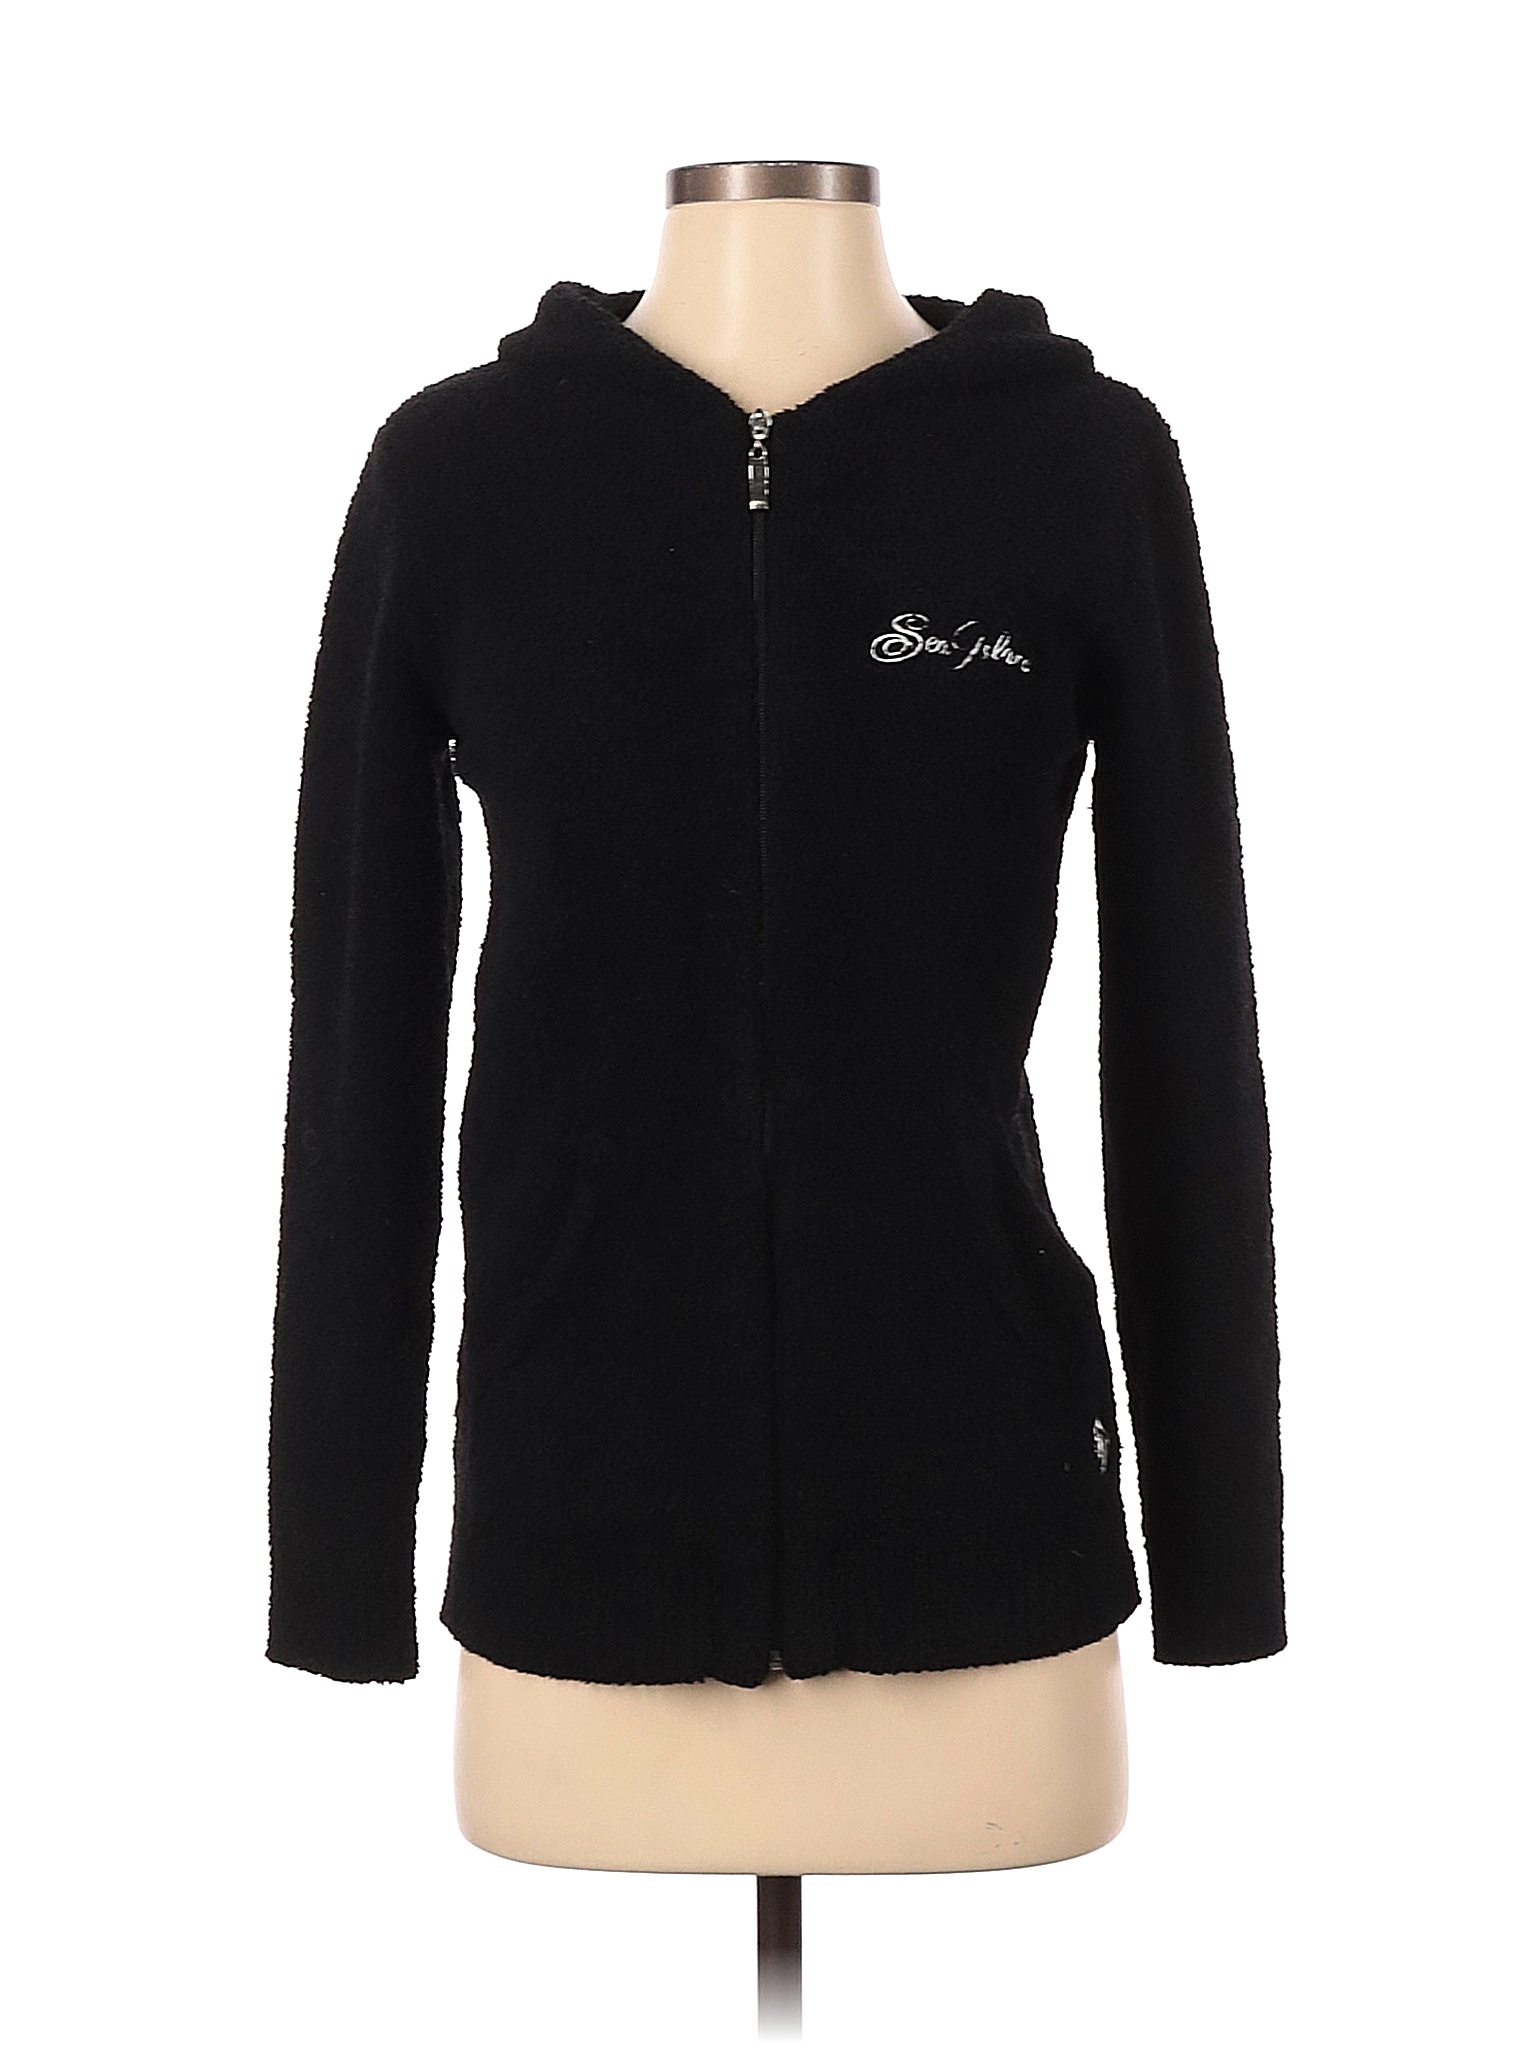 Kashwere 100% Cashmere Solid Black Zip Up Hoodie Size XS - 83% off ...